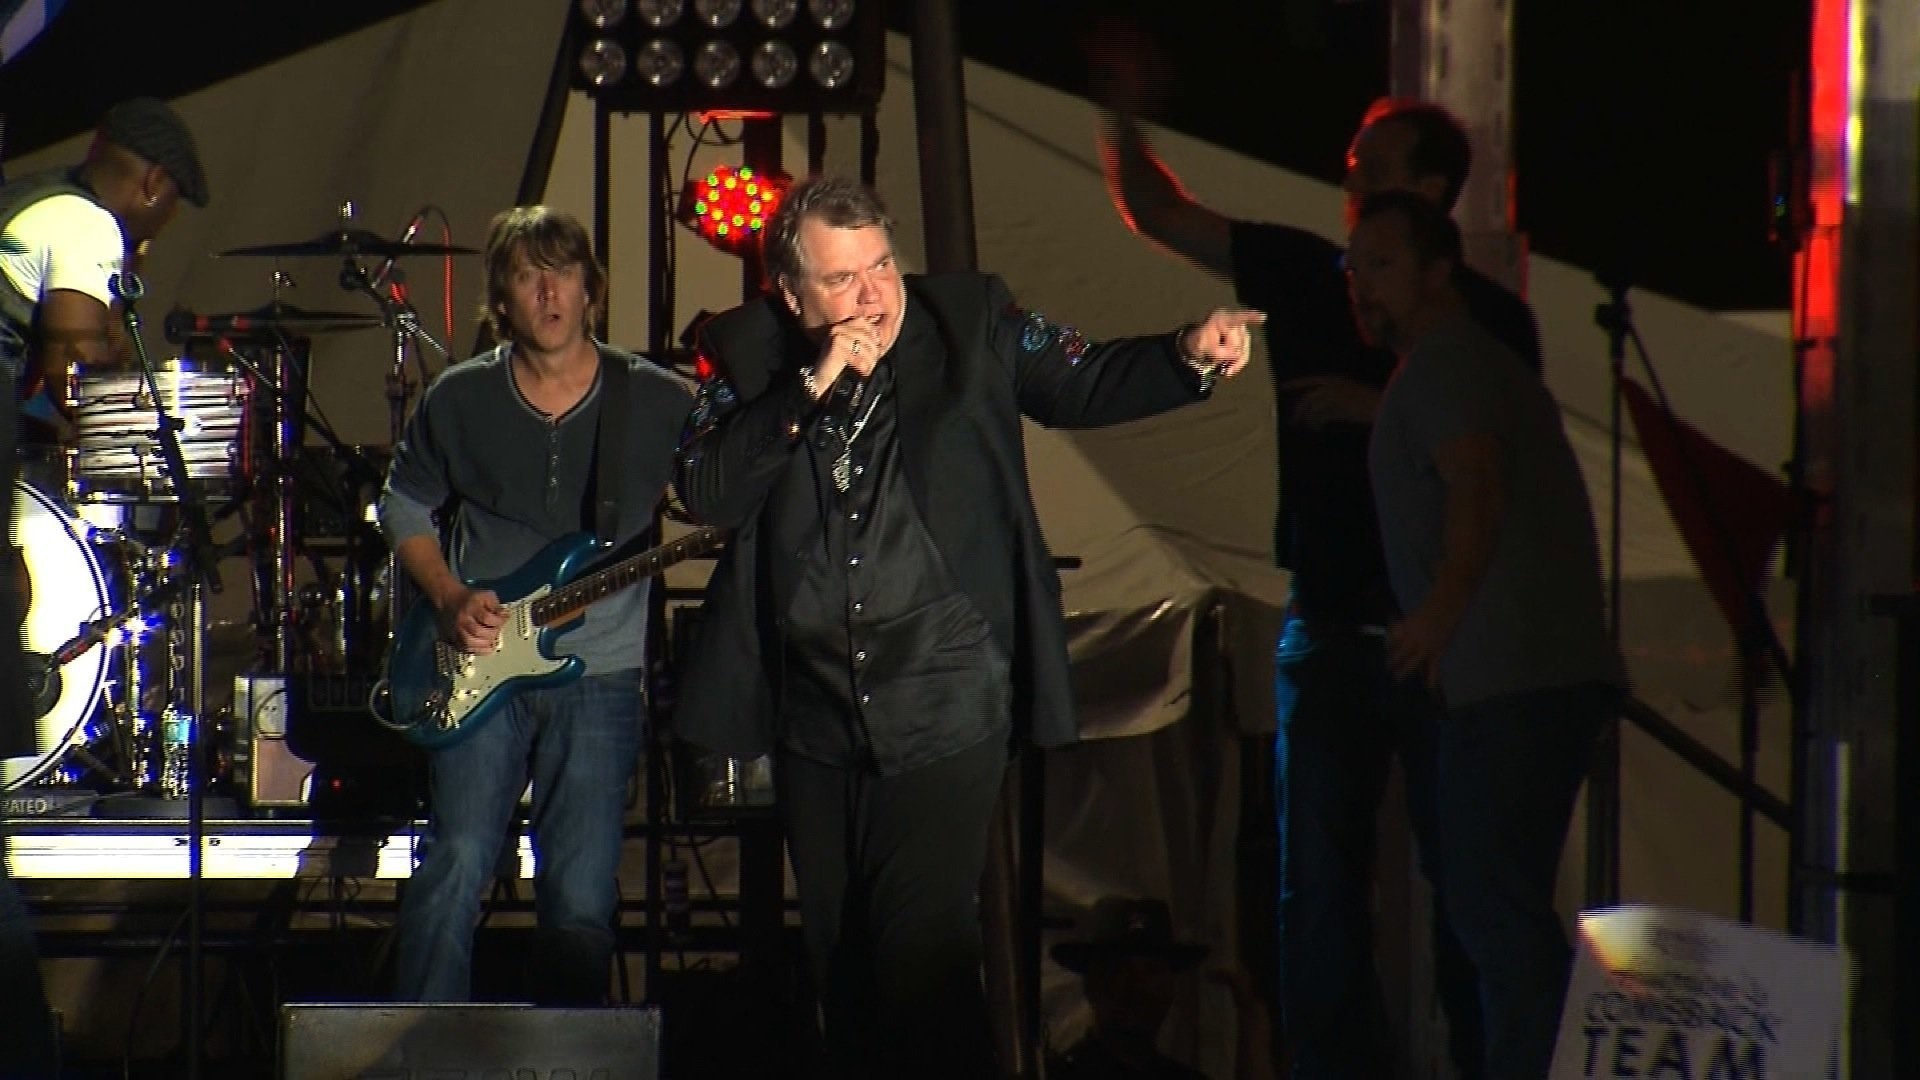 Rock icon Meat Loaf died on Thursday night at 74-years-old, fans in York County said he was a legend.